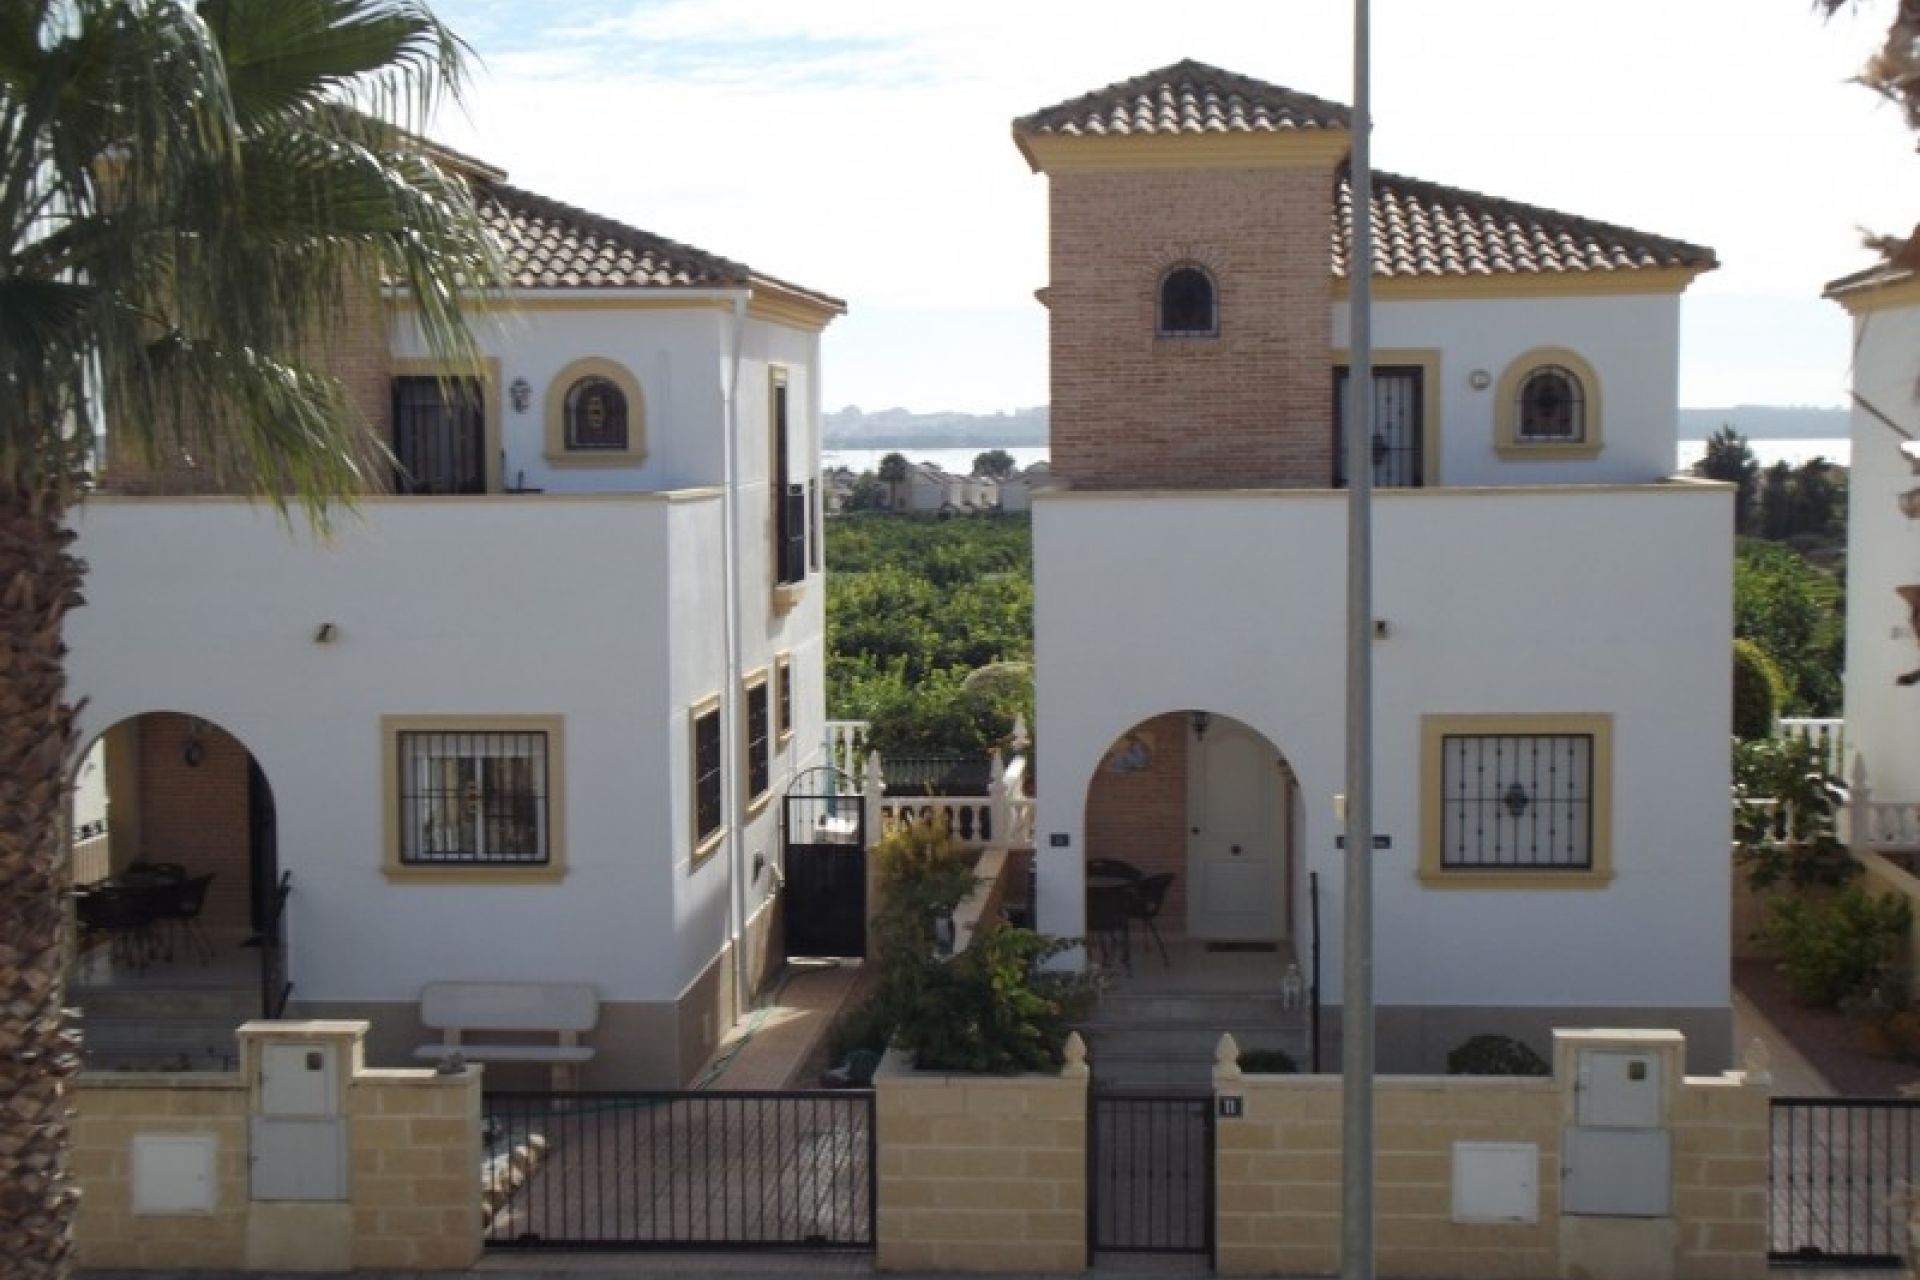 For sale Costa Blanca Spain property for sale cheap